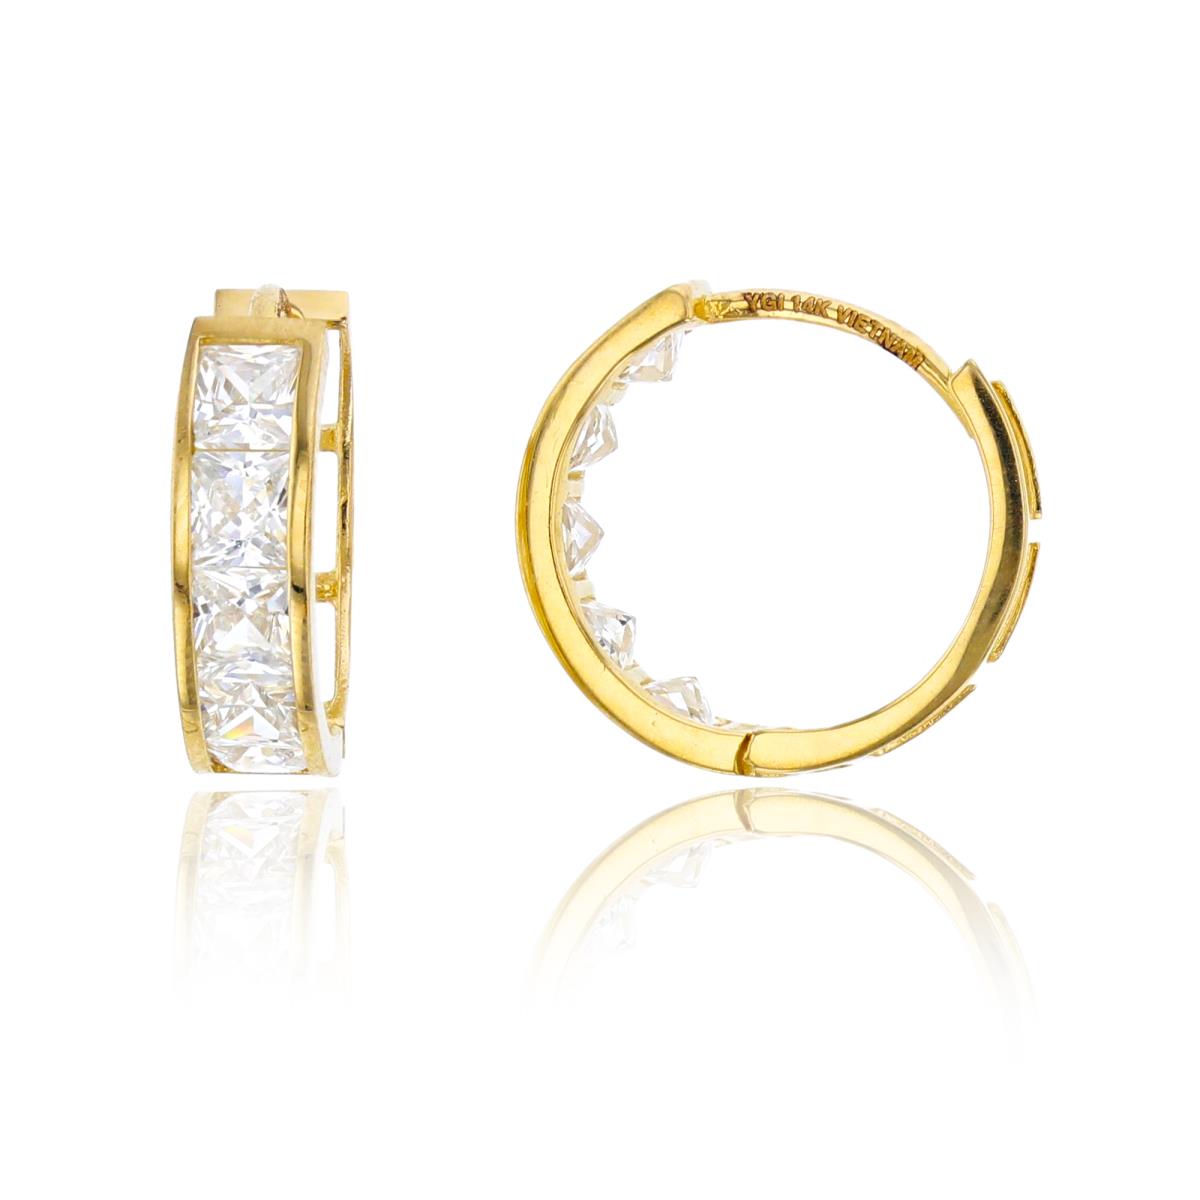 10K Yellow Gold 3mm Square Created White Sapphire Channel Huggie Earring